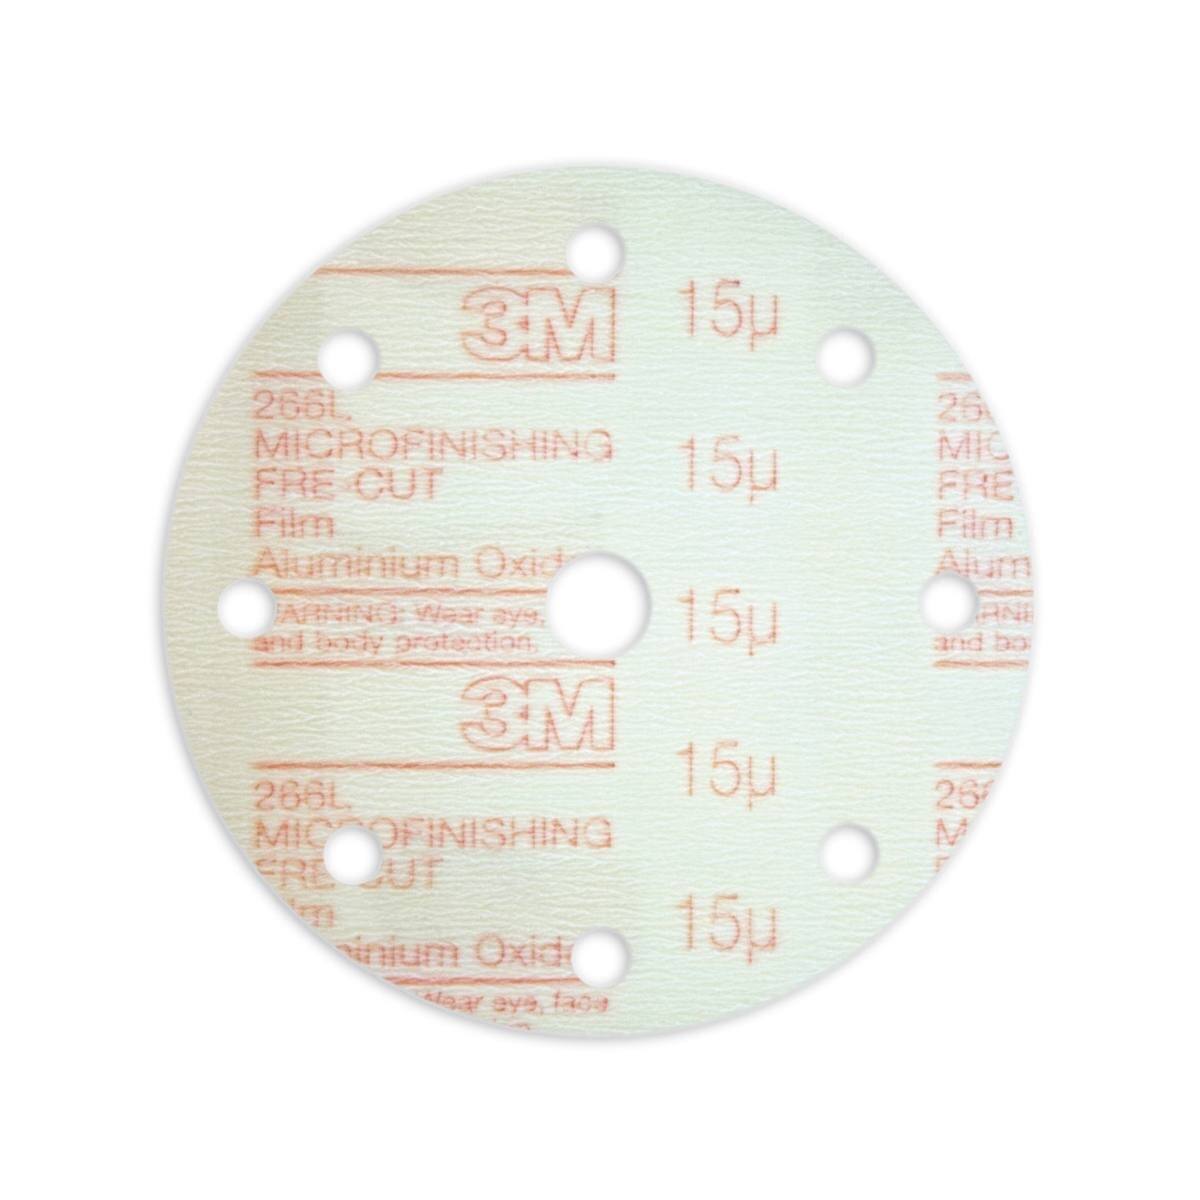 3M Hookit Velcro-backed microfinishing film disc 266L, 150 mm, LD600A, 6 holes, A15 micron #00131